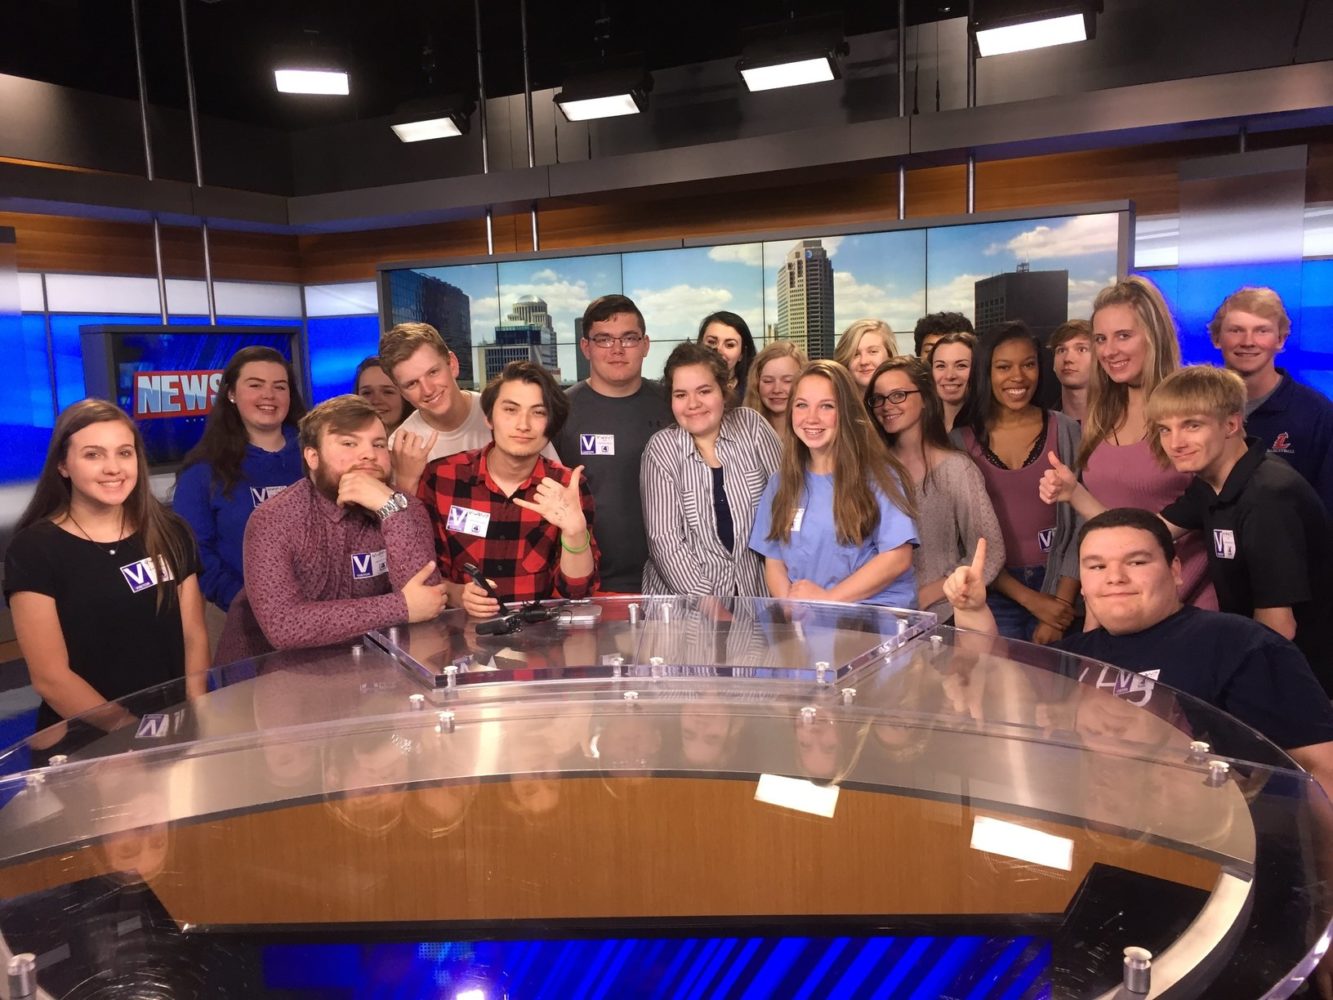 The journalism class took a field trip to KMOV-Channel 4 where they learned about how a news station works and get helpful advice from professional journalists  themselves.